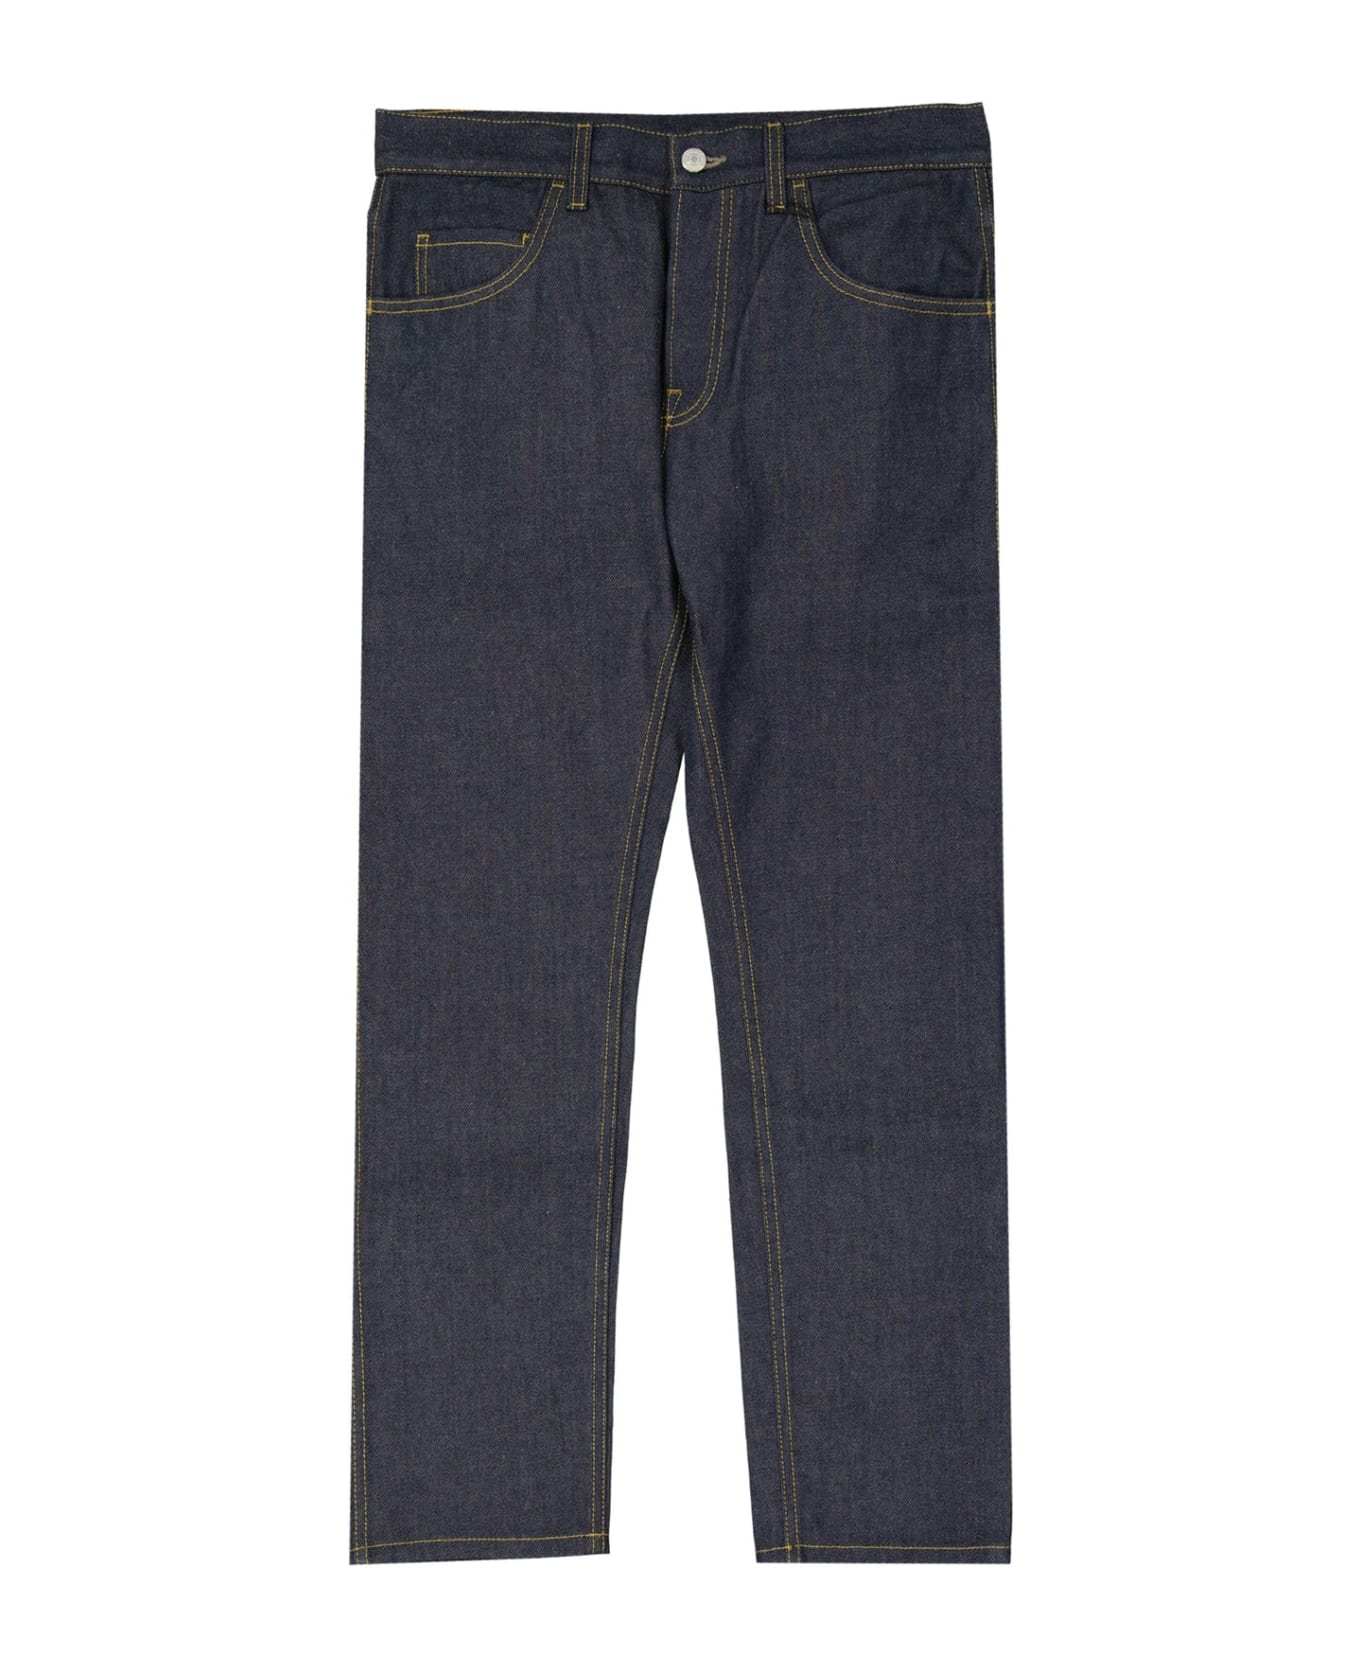 Gucci Cotton Loved Jeans - Blue デニム